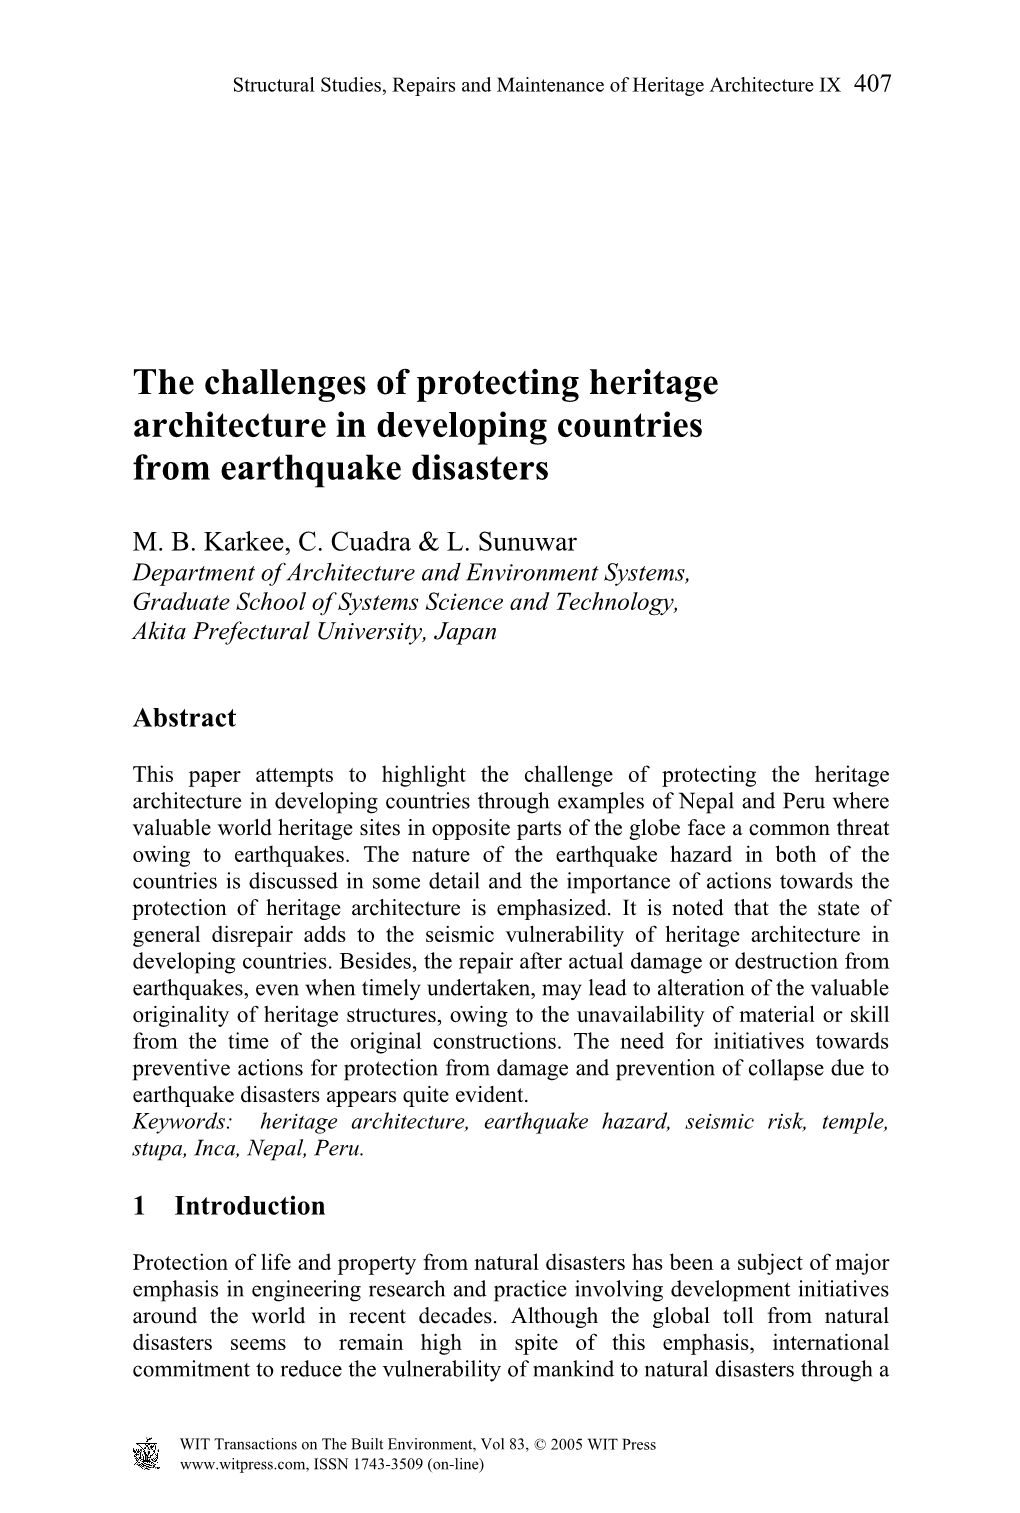 The Challenges of Protecting Heritage Architecture in Developing Countries from Earthquake Disasters